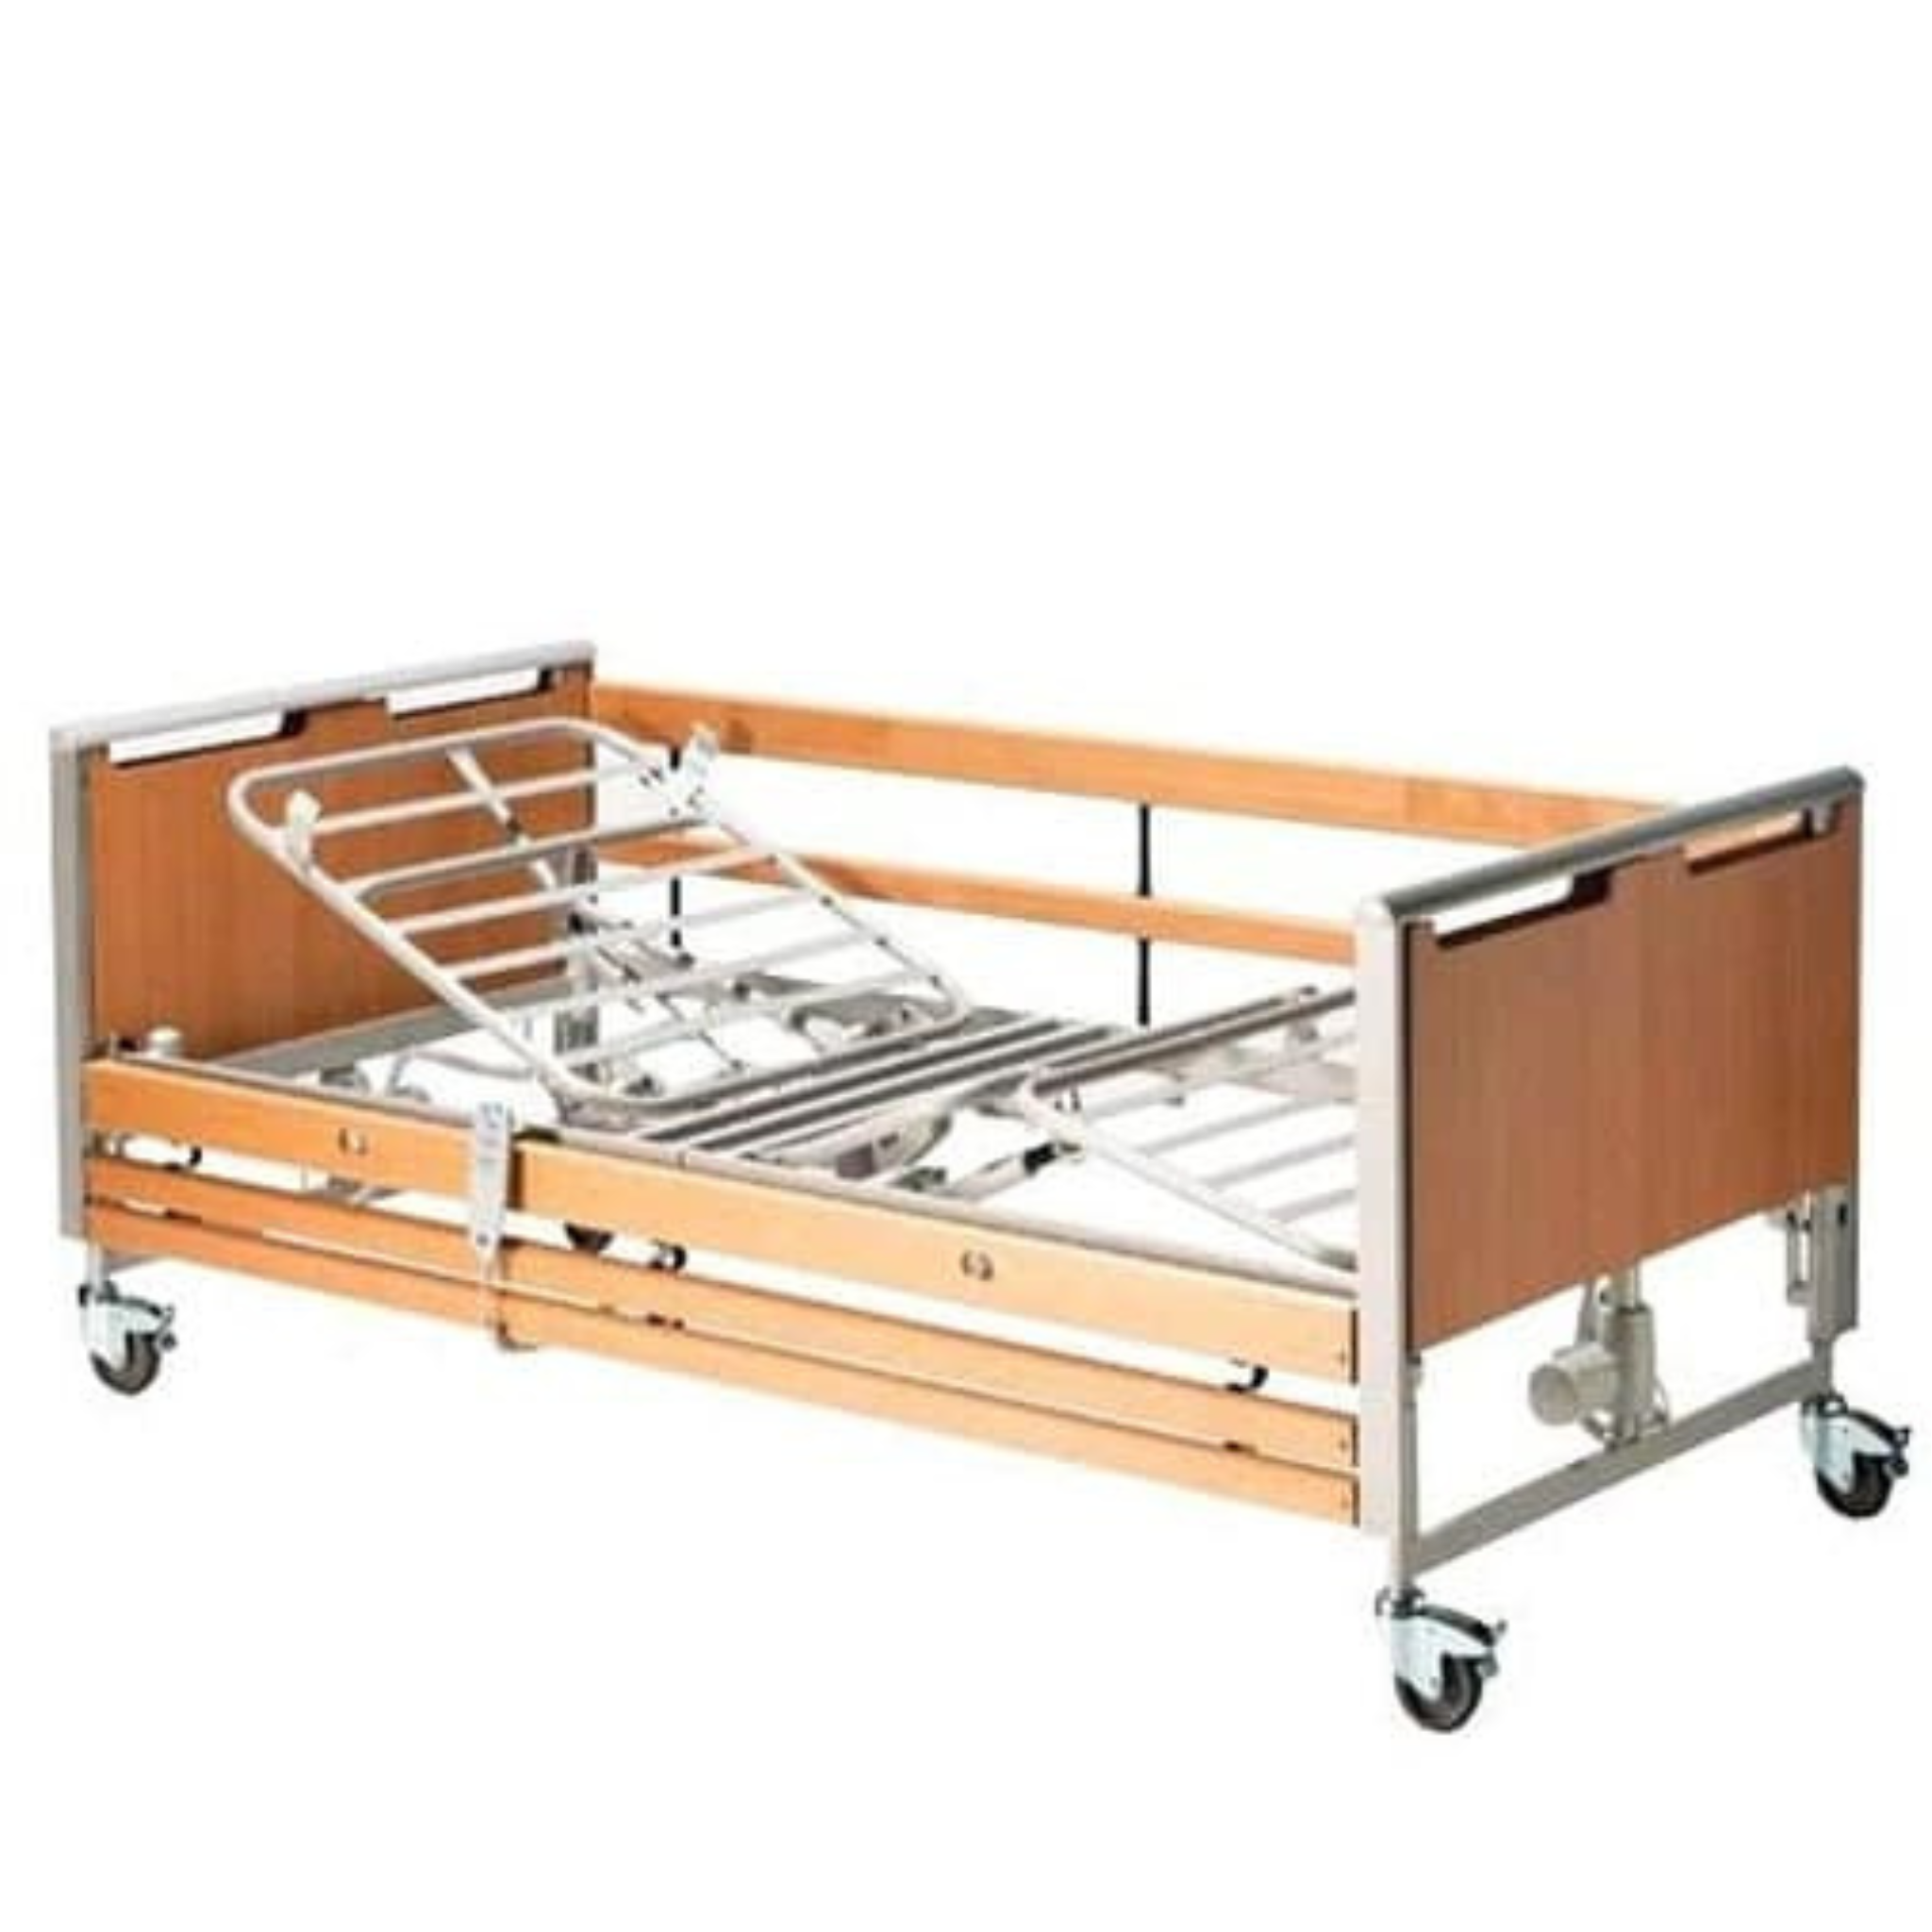 Rental - Invacare Etude Community Bed - Long Single from Aged Care and Medical - Community Bed for Hire for Aged Care